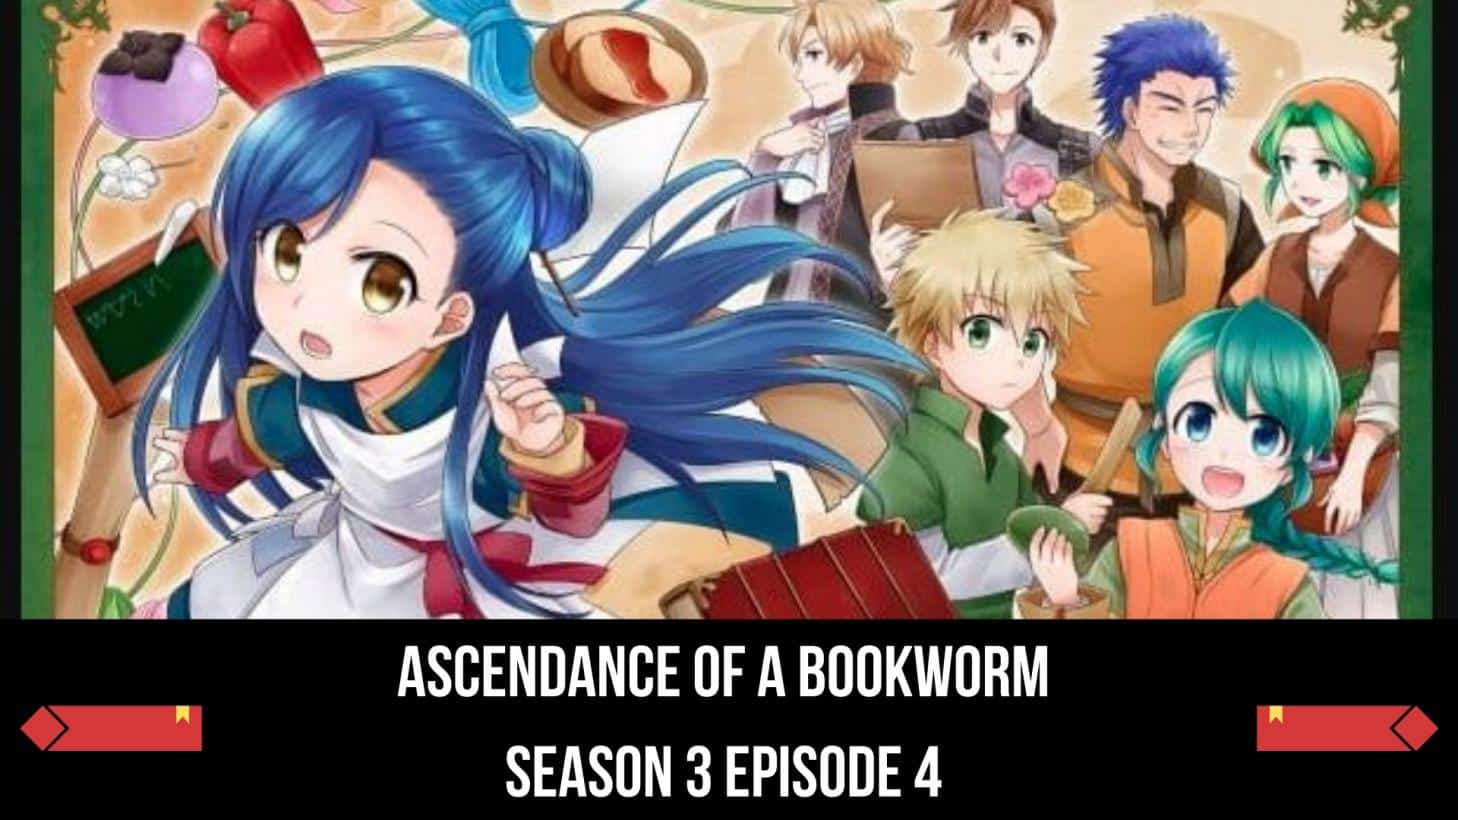 Ascendance of a Bookworm Season 3 Episode 4 Release Date, Plot, Spoiler and Time